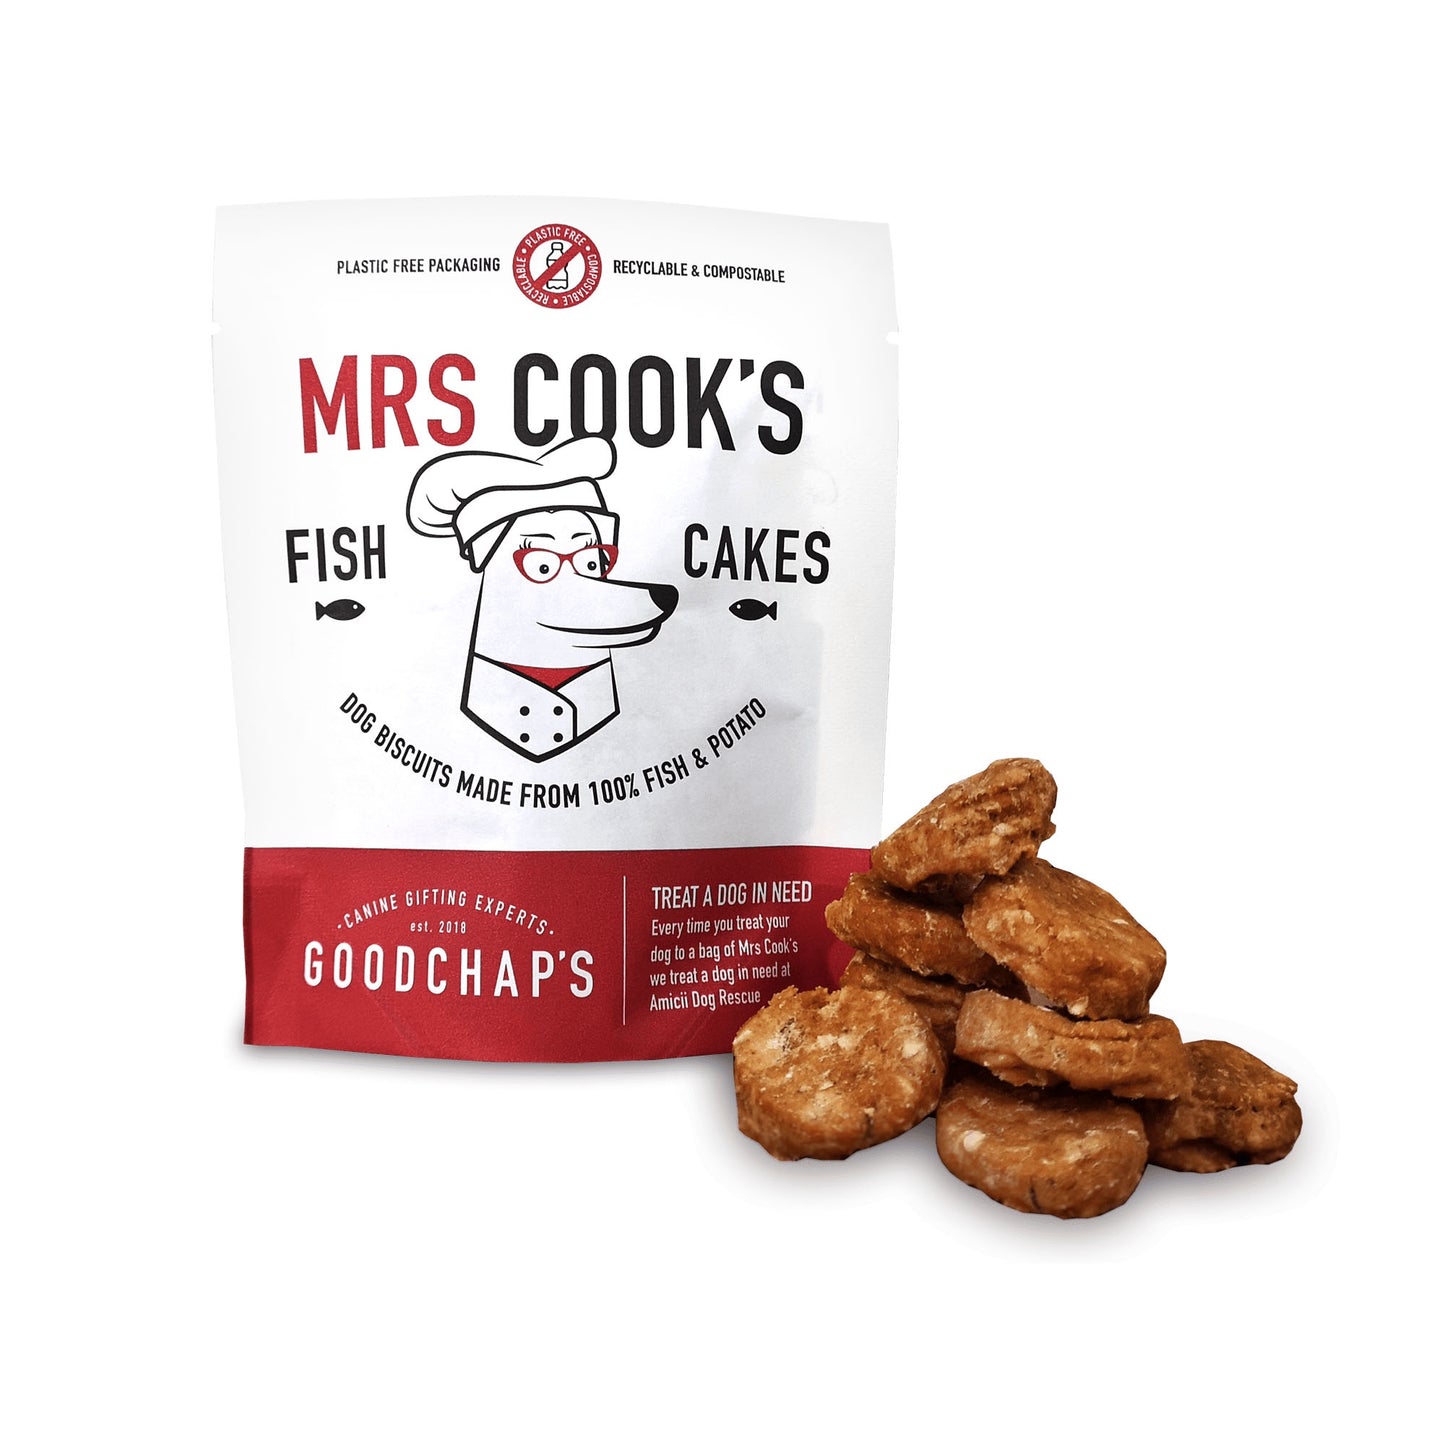 Mrs Cook's Fish Cakes